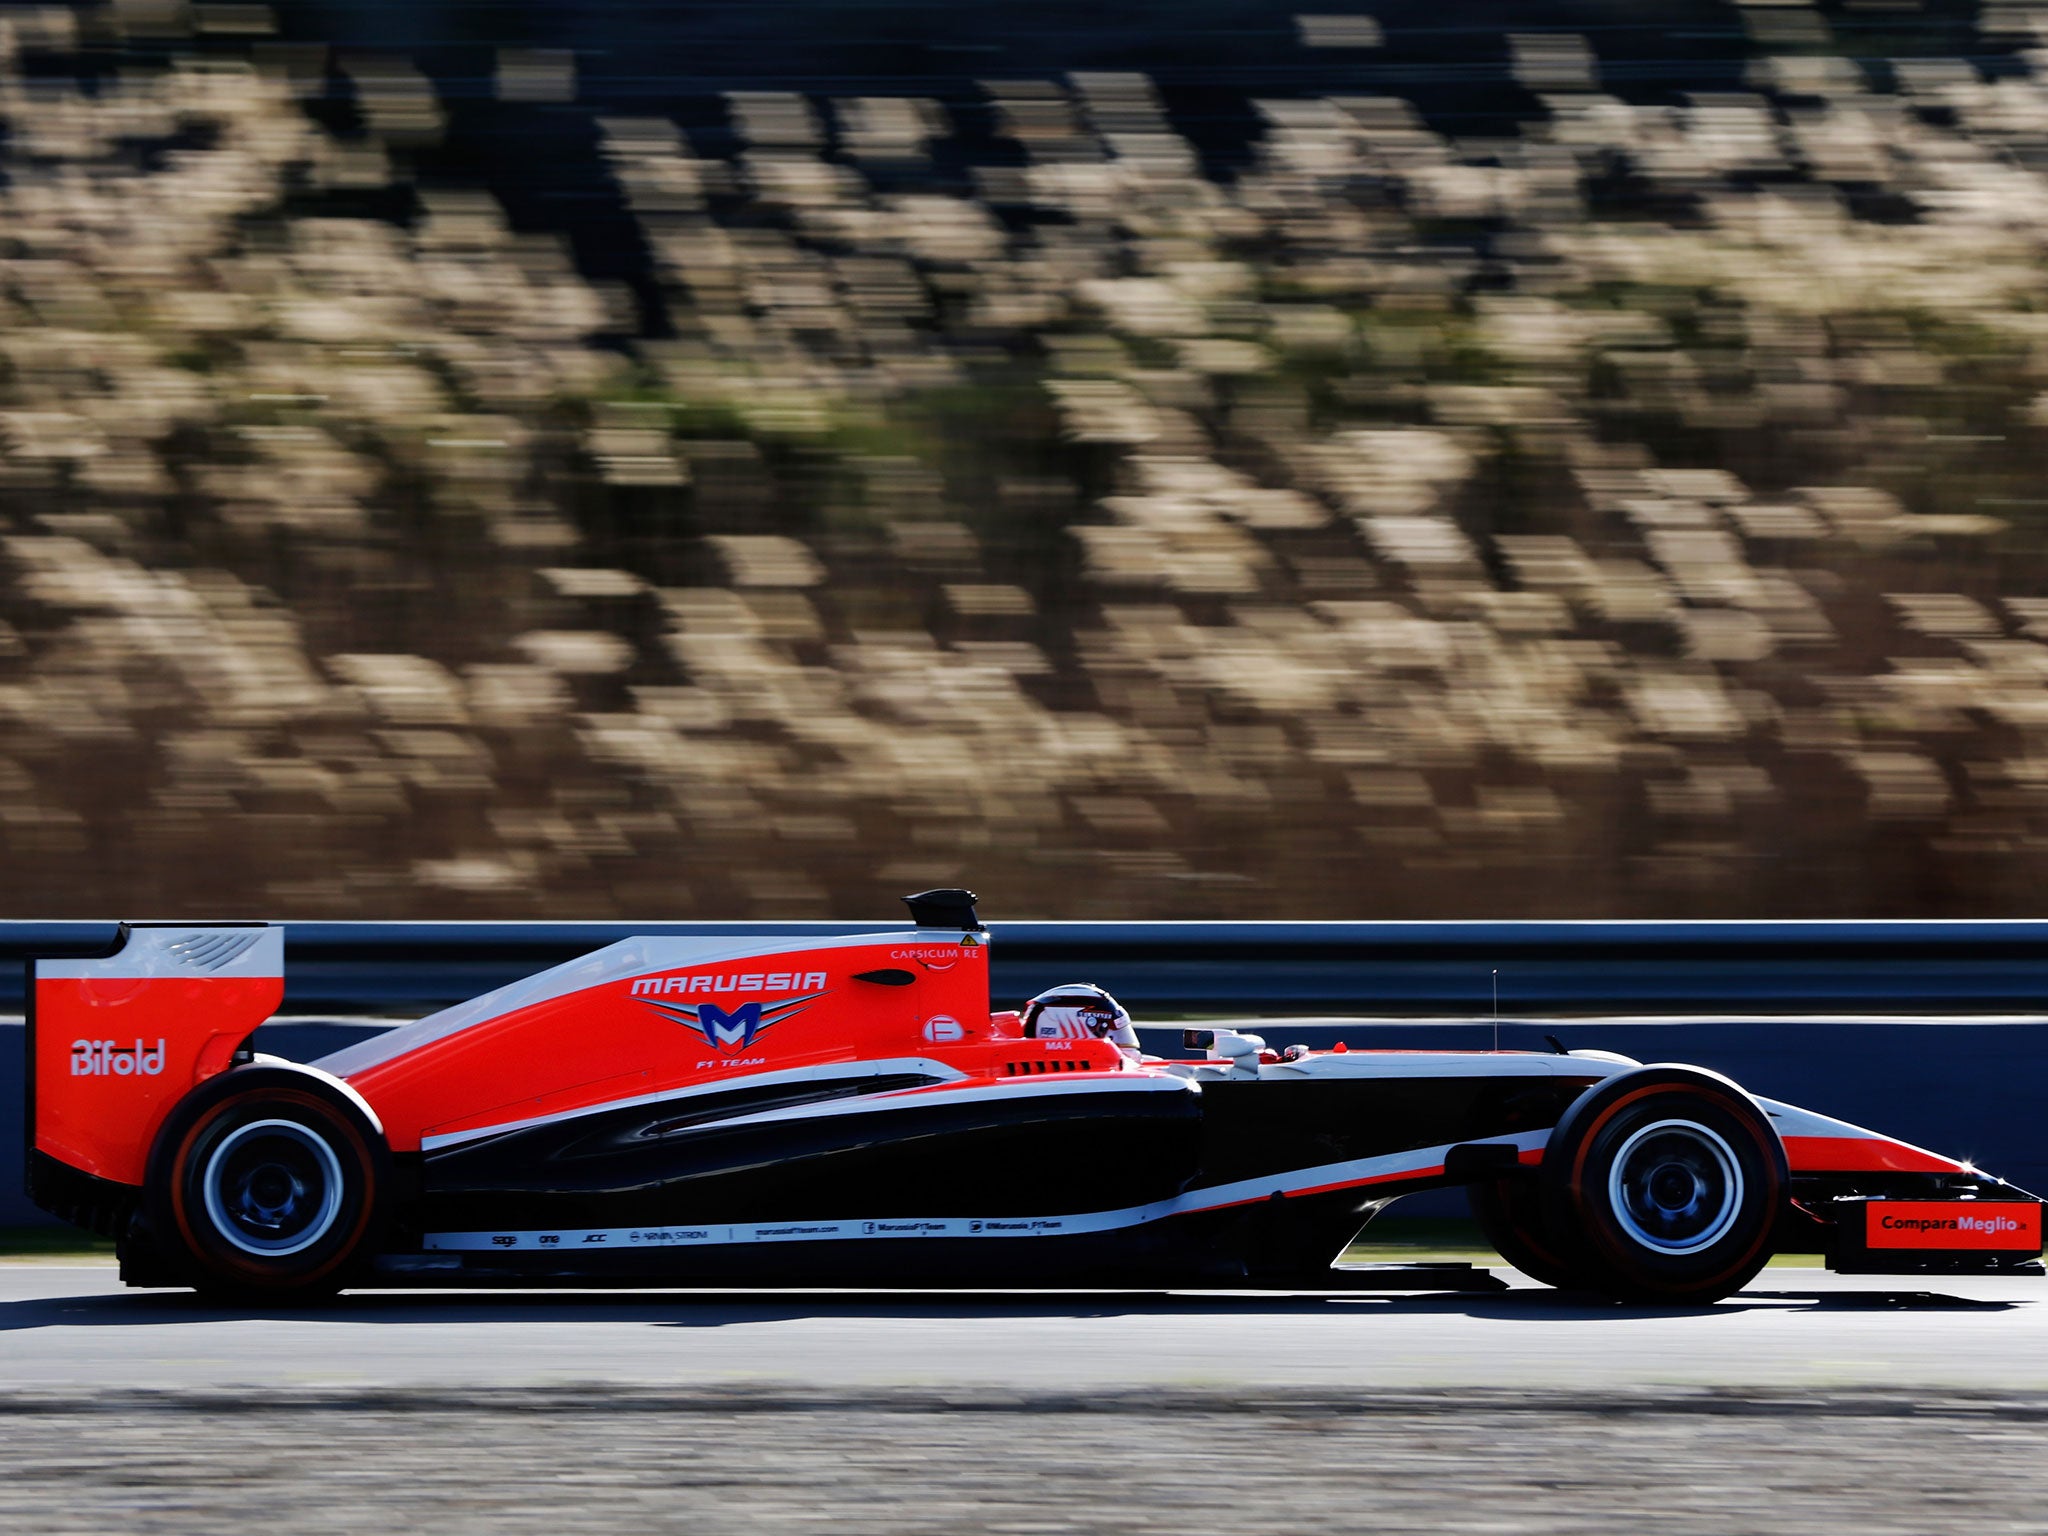 Marussia have confirmed Roberto Mehri as their second driver for the 2015 season